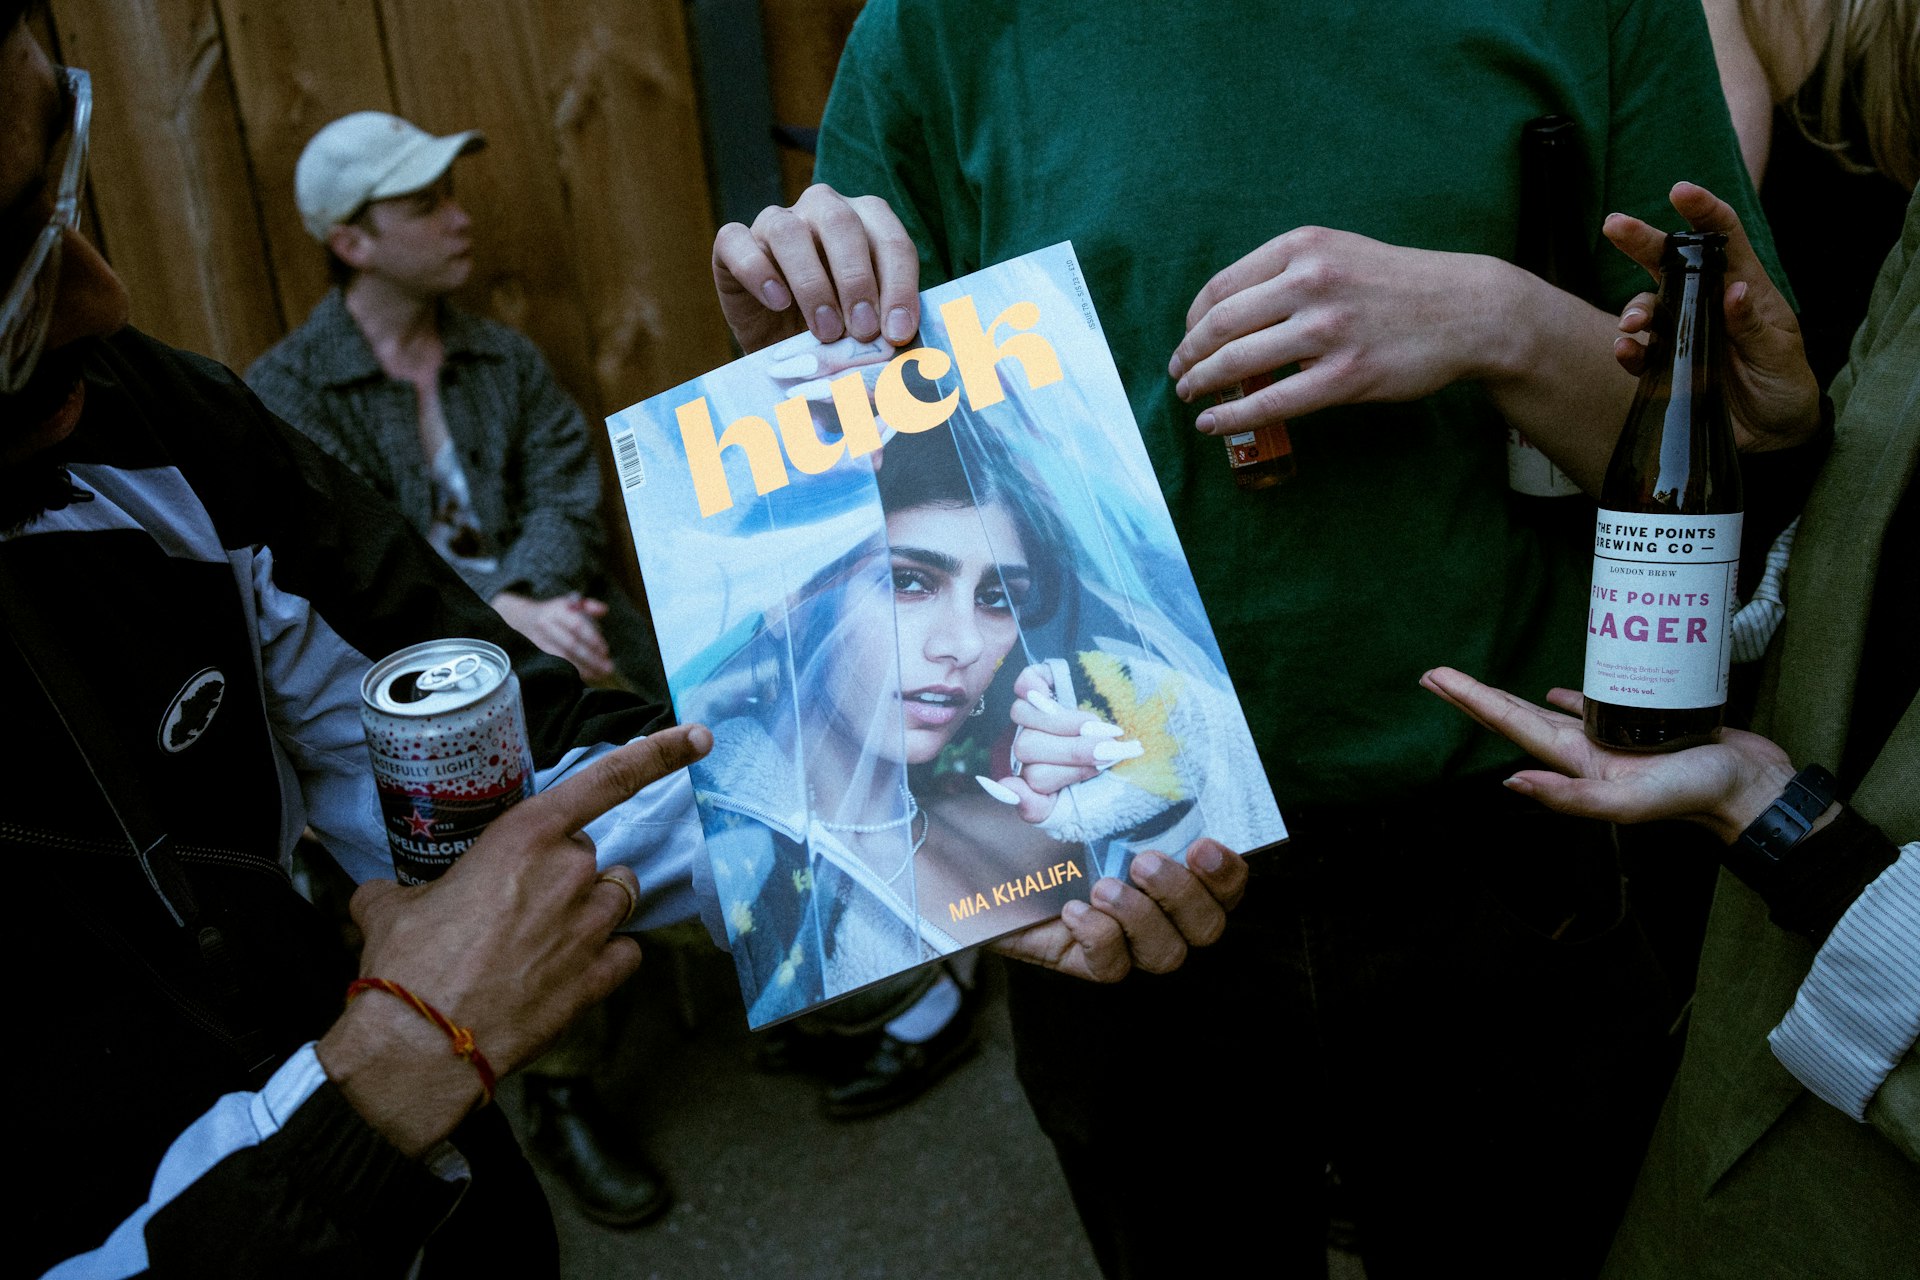 Everything that went down at Huck's Issue 79 launch party – in photos